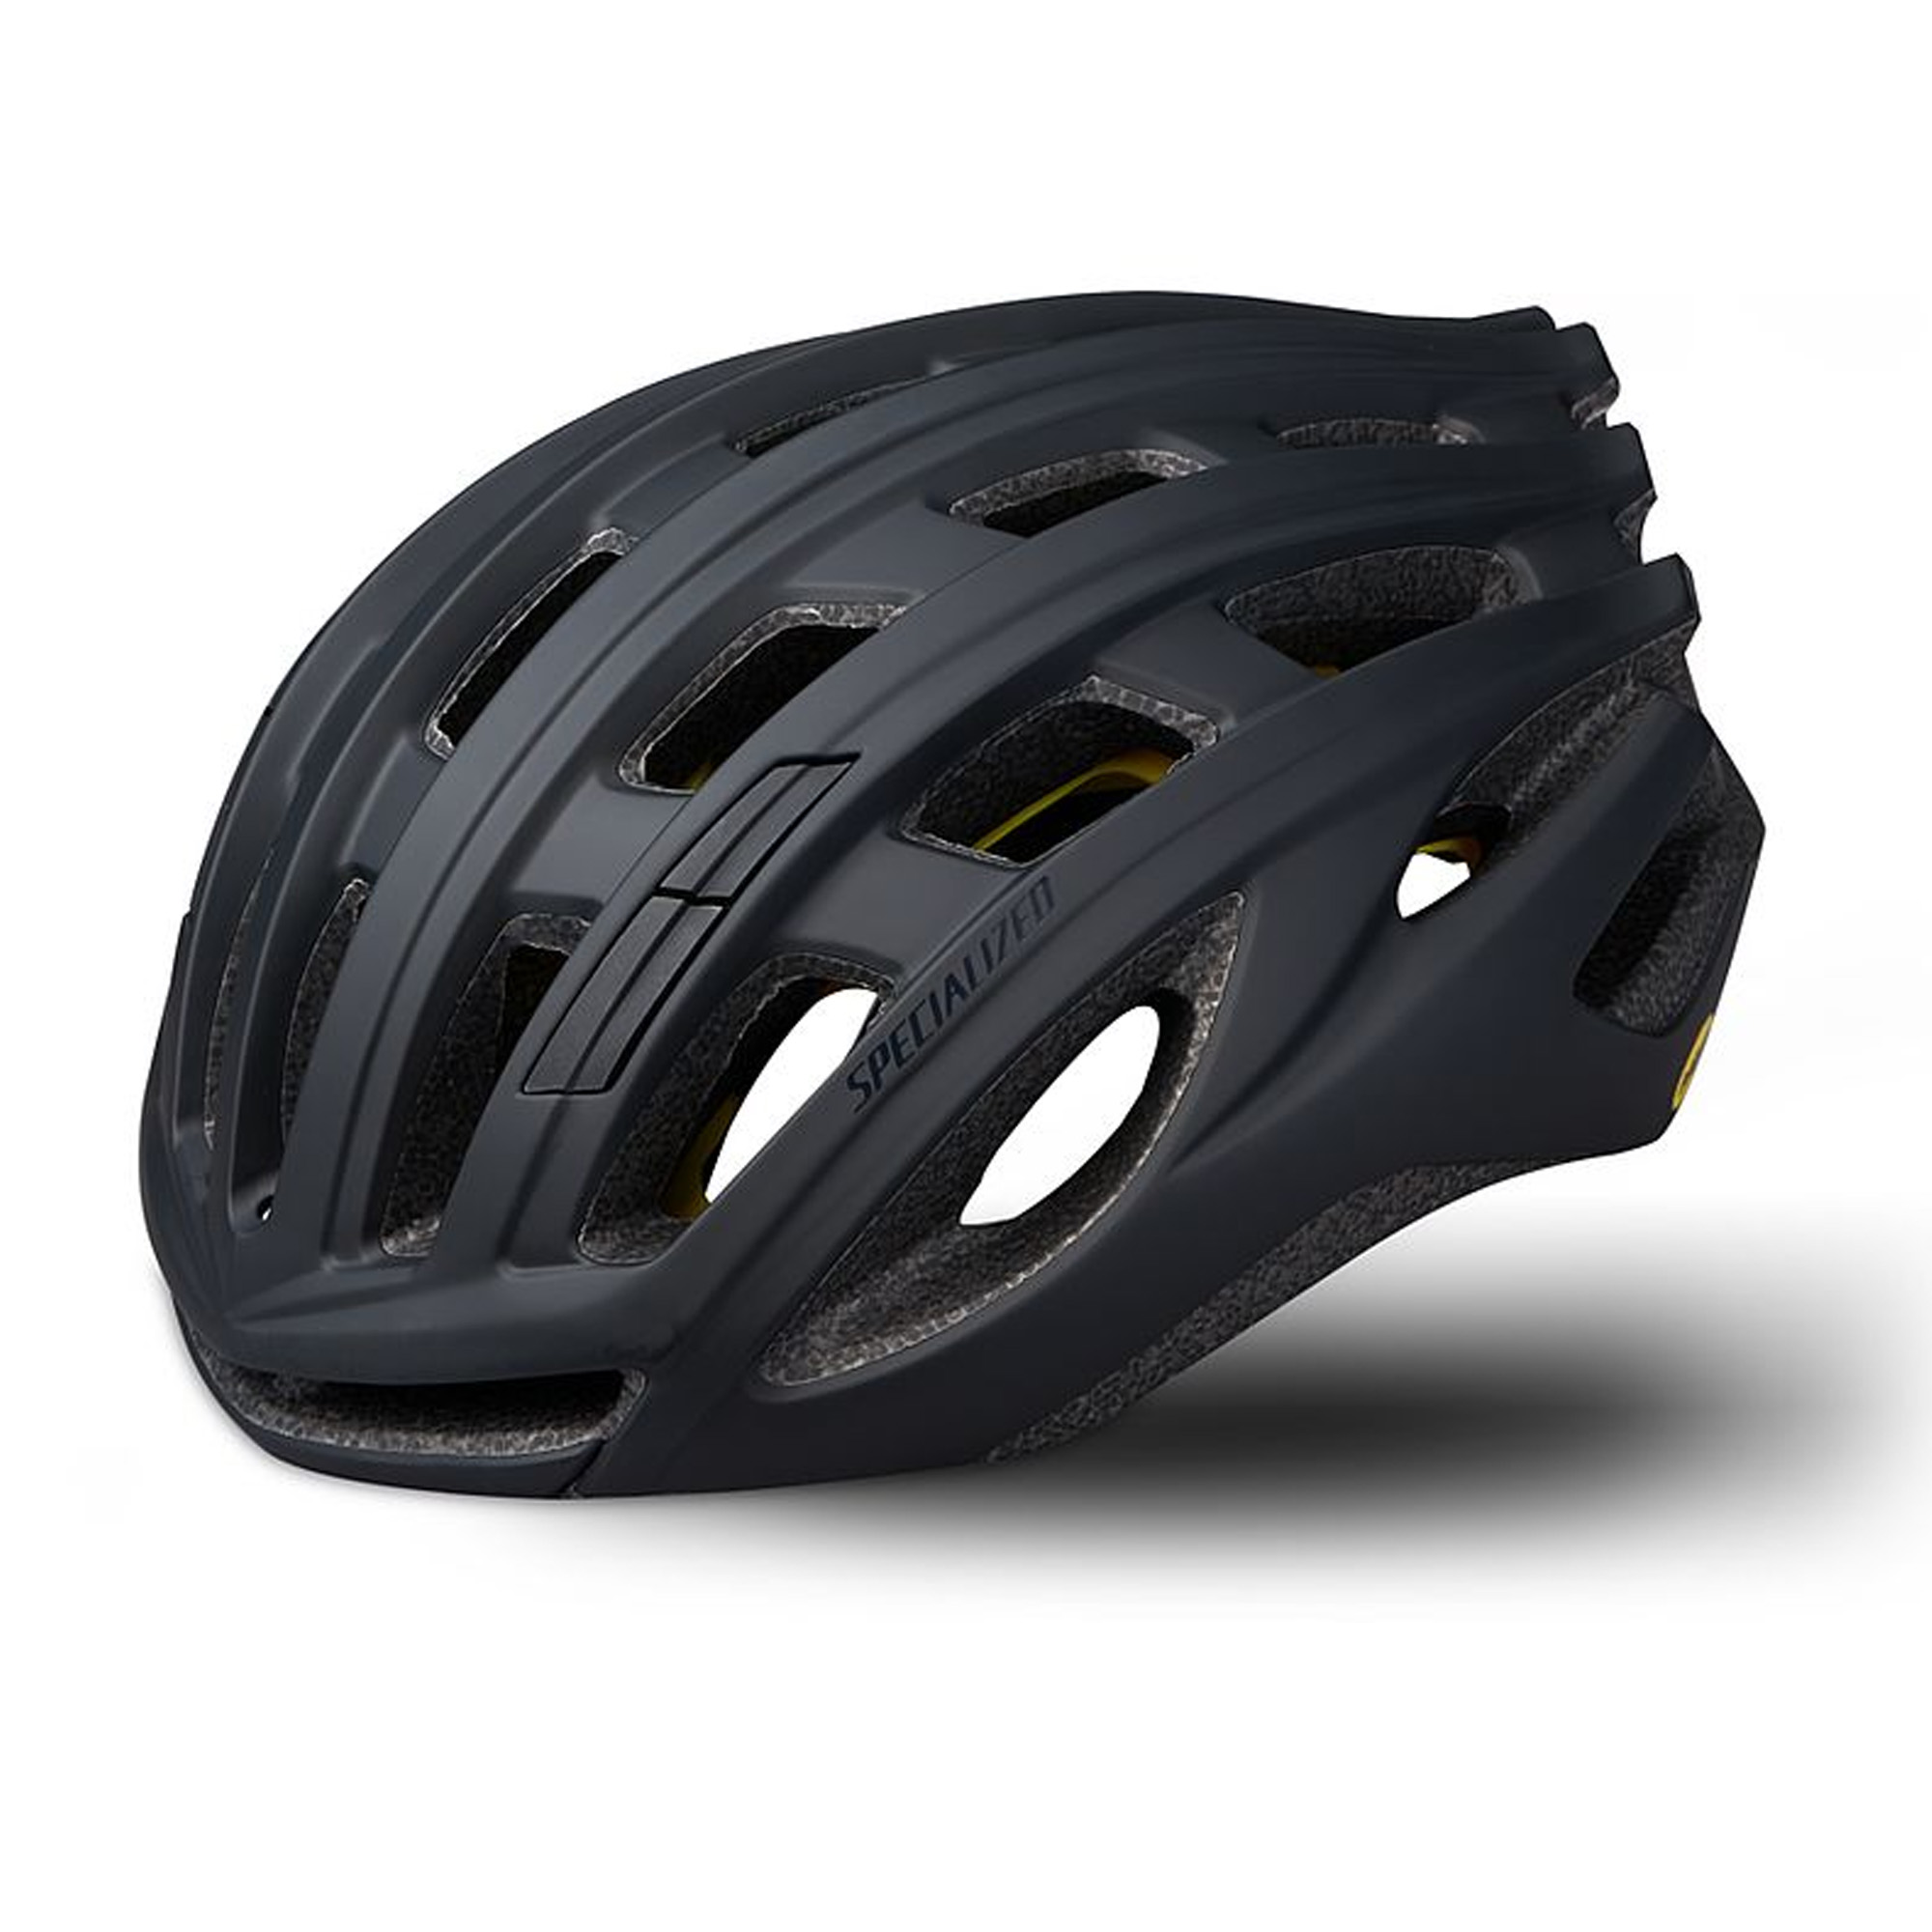 Capacete Specialized Propero 3 c/ Mips